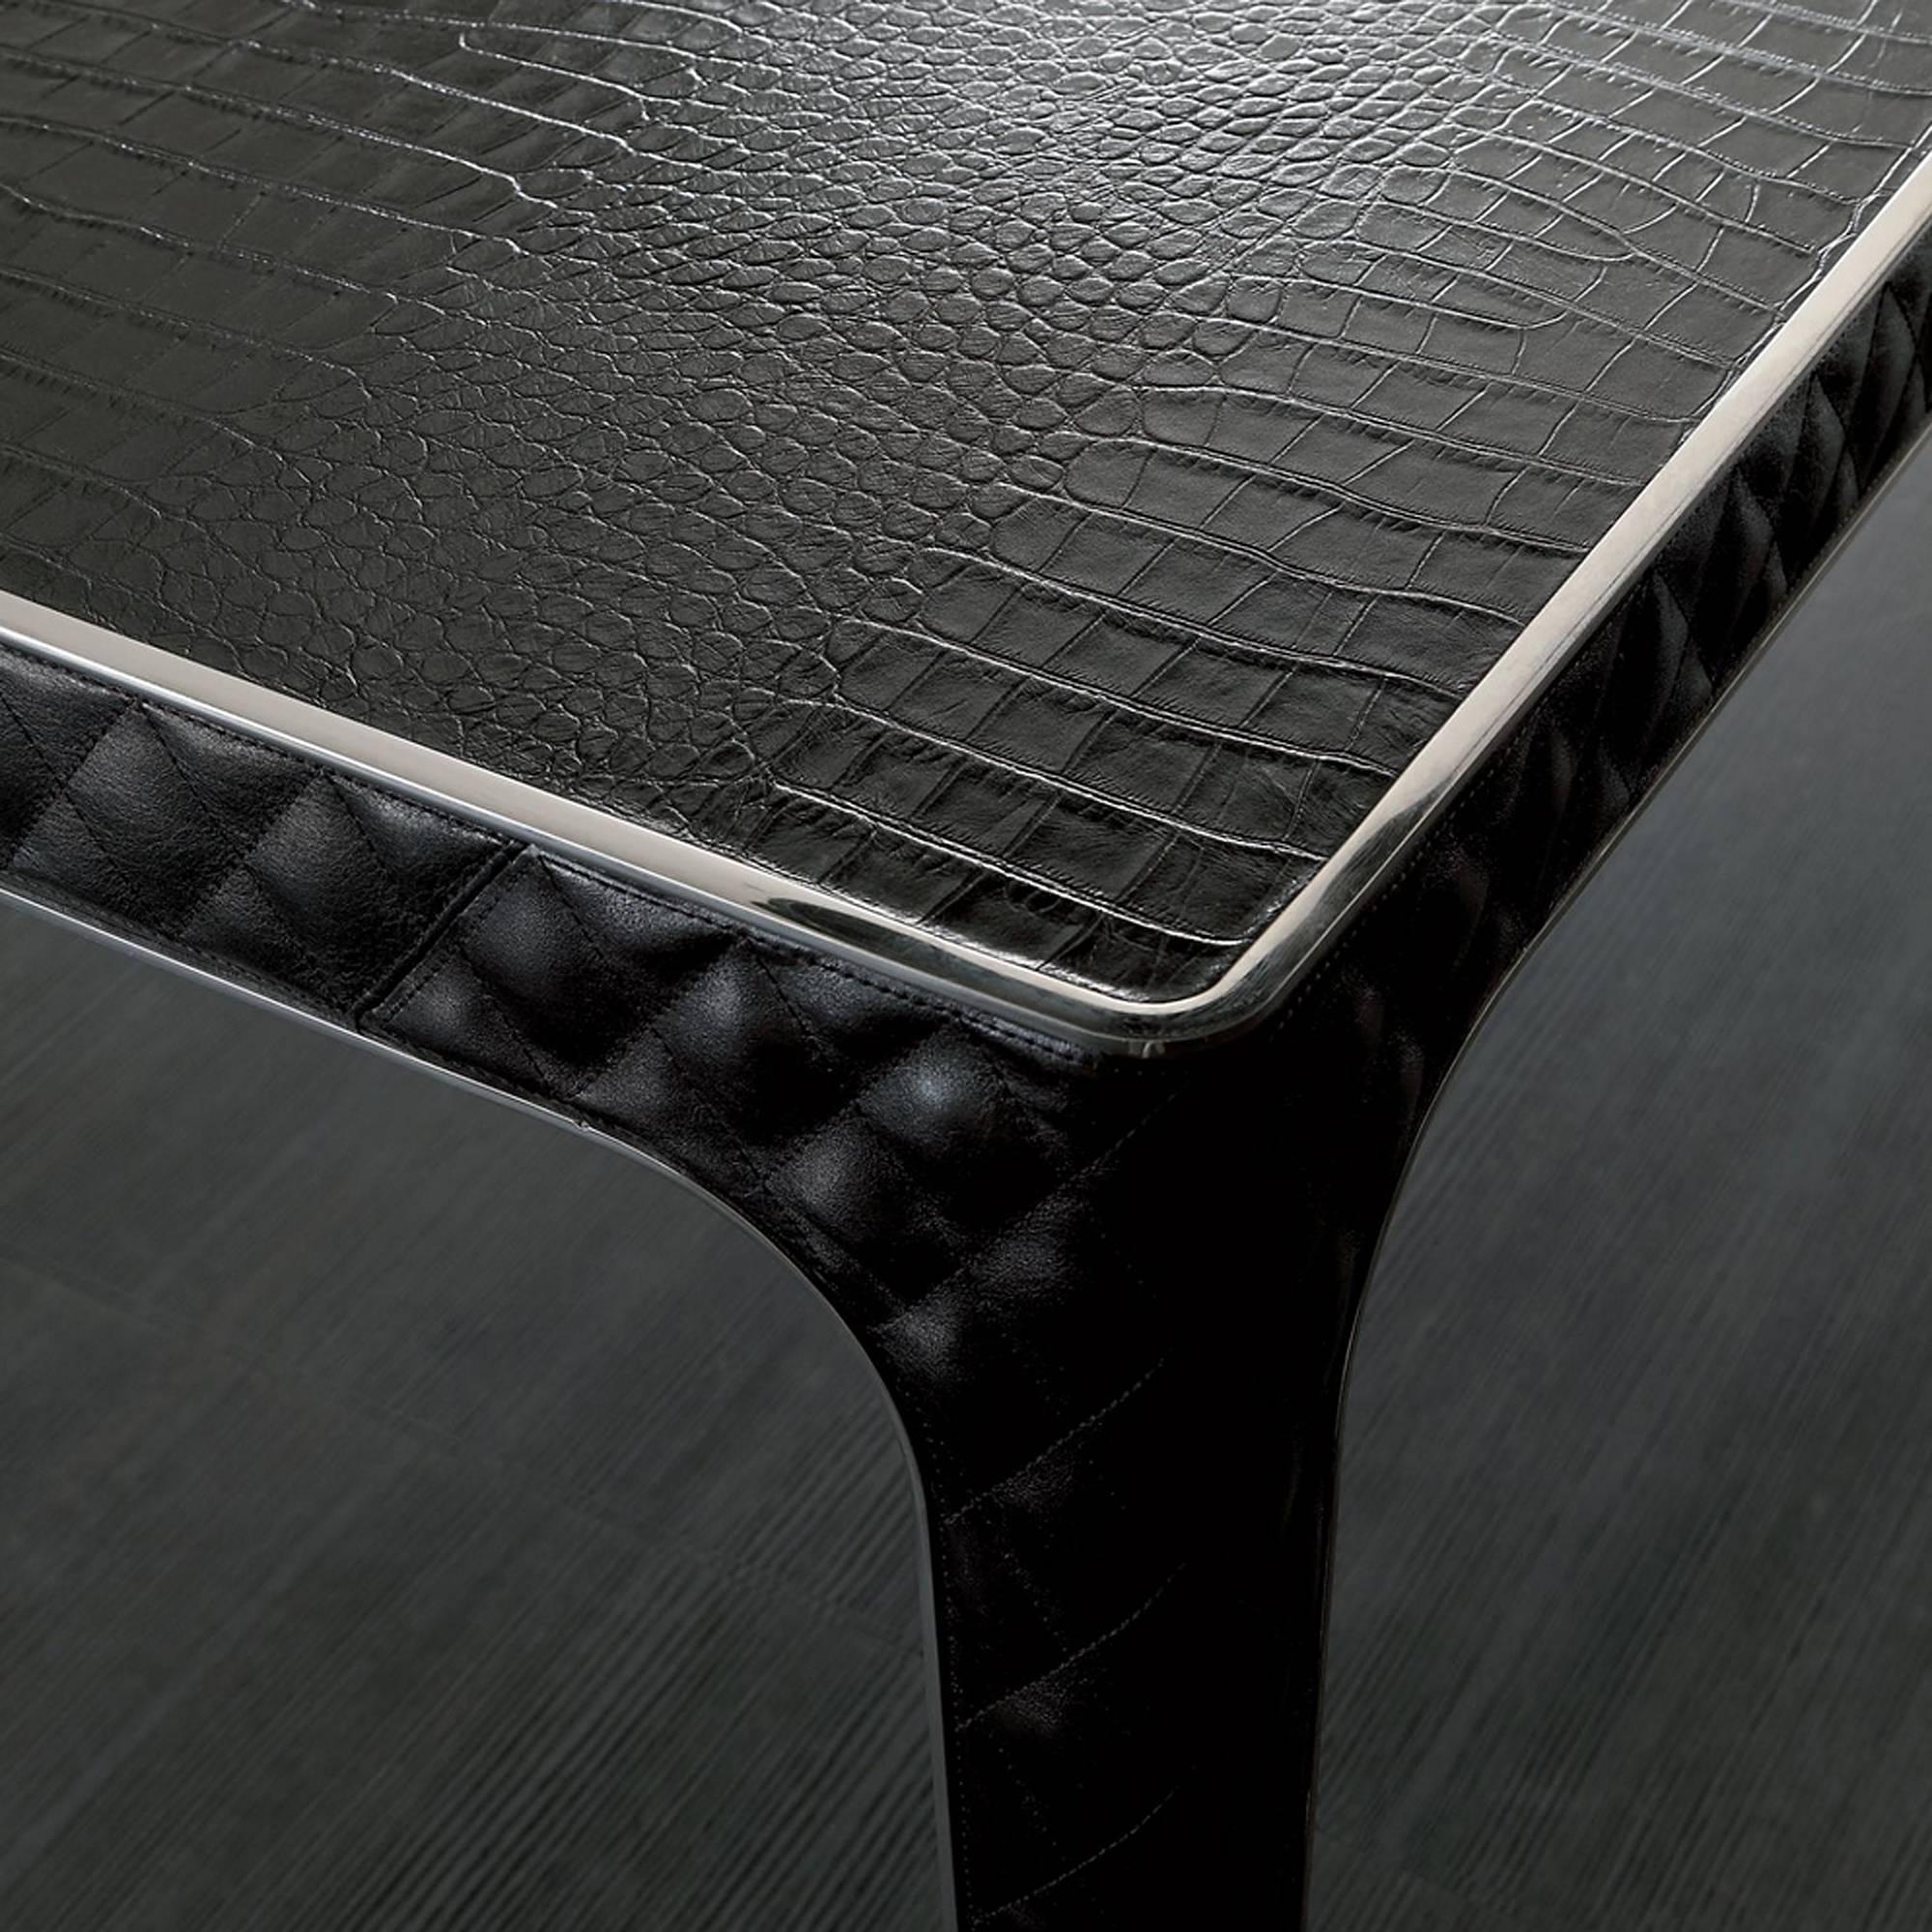 Blackened Shadow Table Genuine Leather and Stainless Steel Structure For Sale